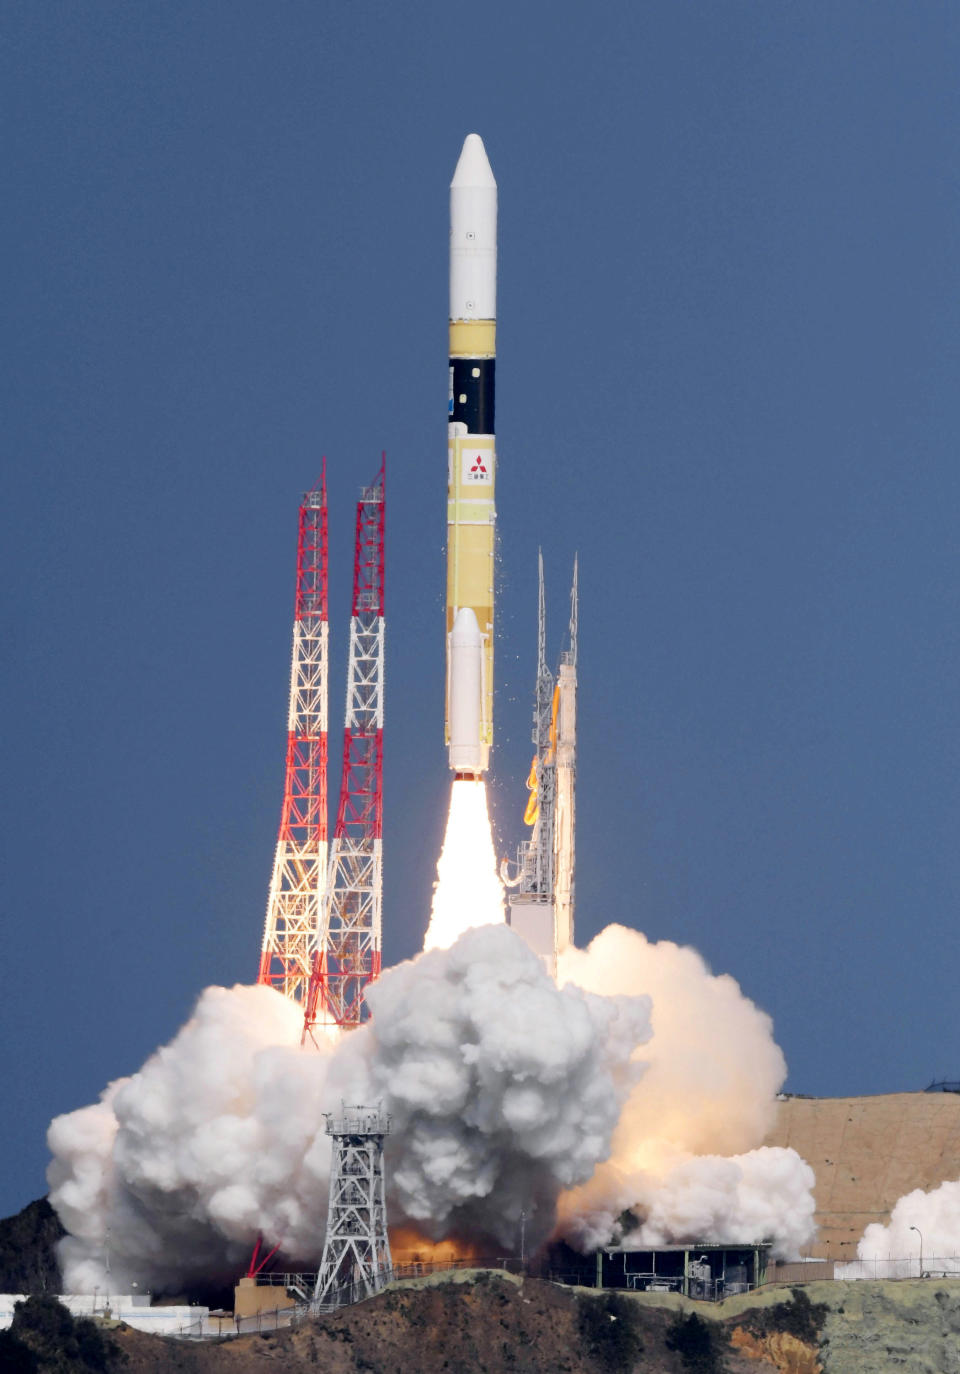 Japan's rocket H-2A is launched, carrying aboard a green gas observing satellite "Ibuki-2" and KhalifaSat, a UAE satellite, Tanegashima, southern Japan, Monday, Oct. 29, 2018. The Japanese rocket carrying United Arab Emirates' first locally-made satellite has successfully lifted off from a space center in southern Japan. (Nozomi Endo/Kyodo News via AP)